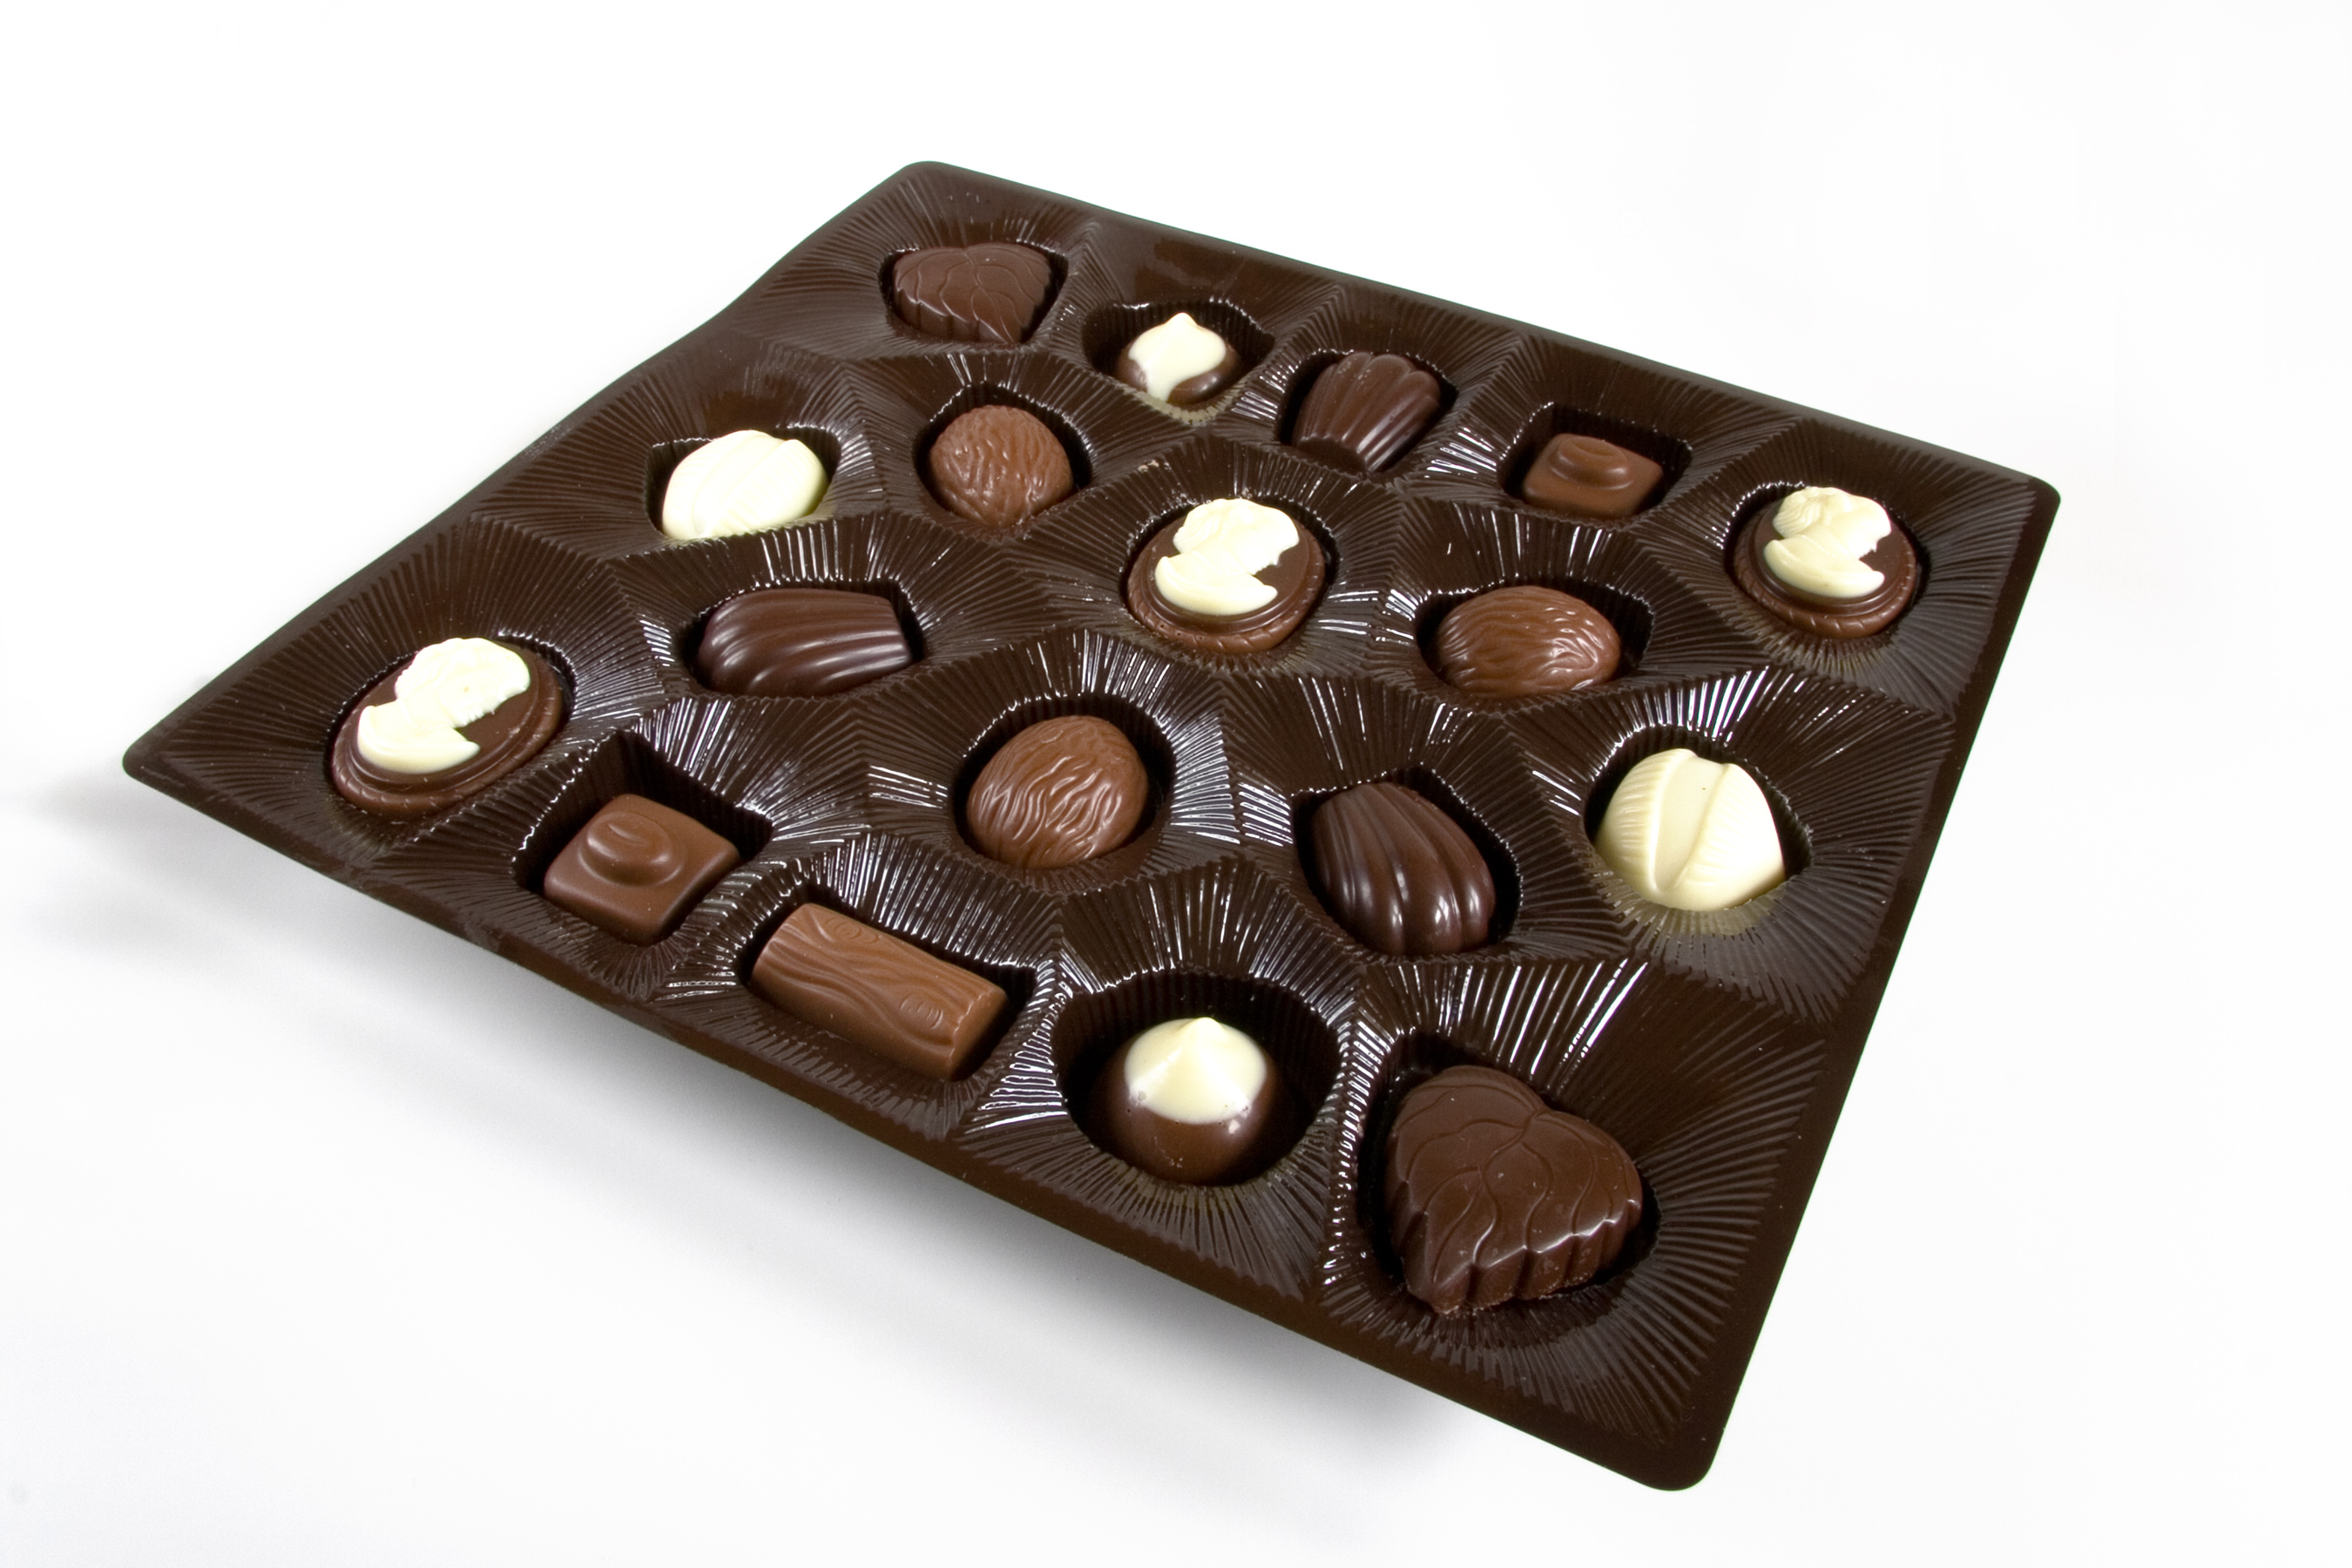 Assorted chocolate candies in a box